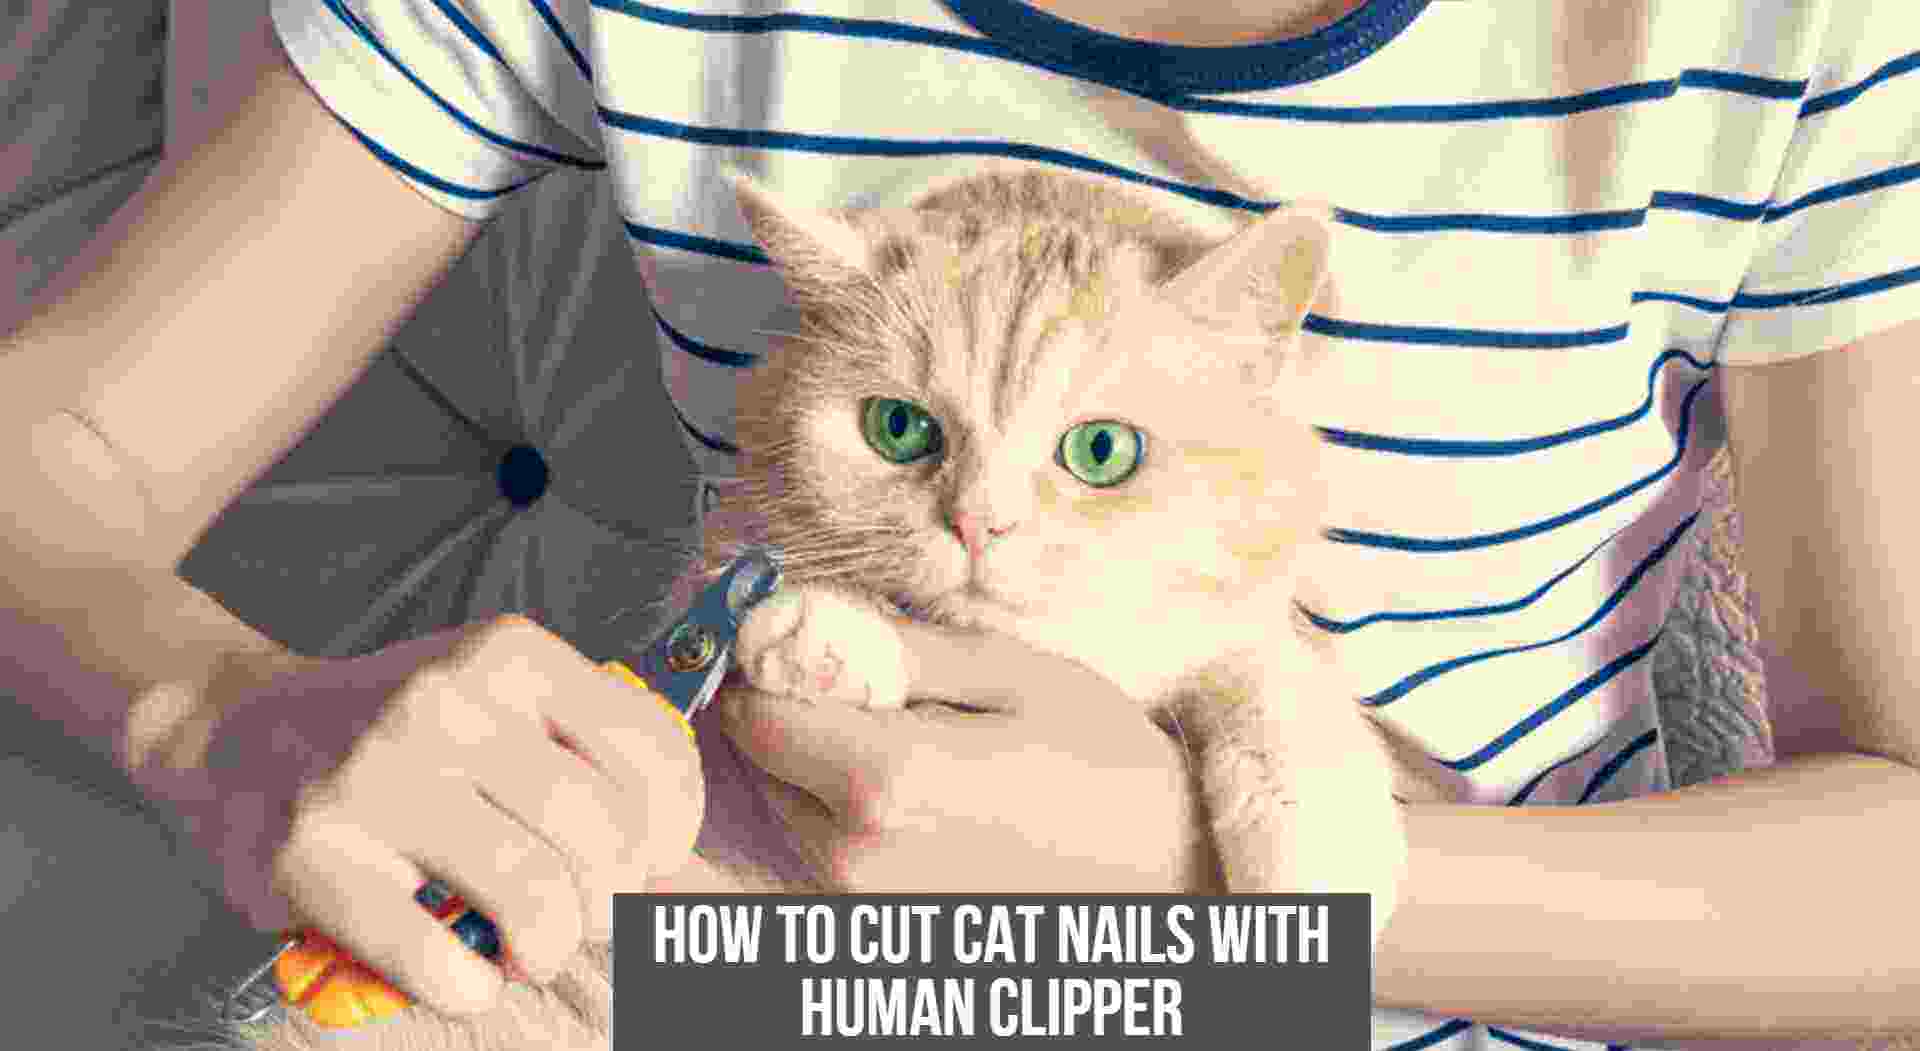 12 How to cut cat nails with human clippers